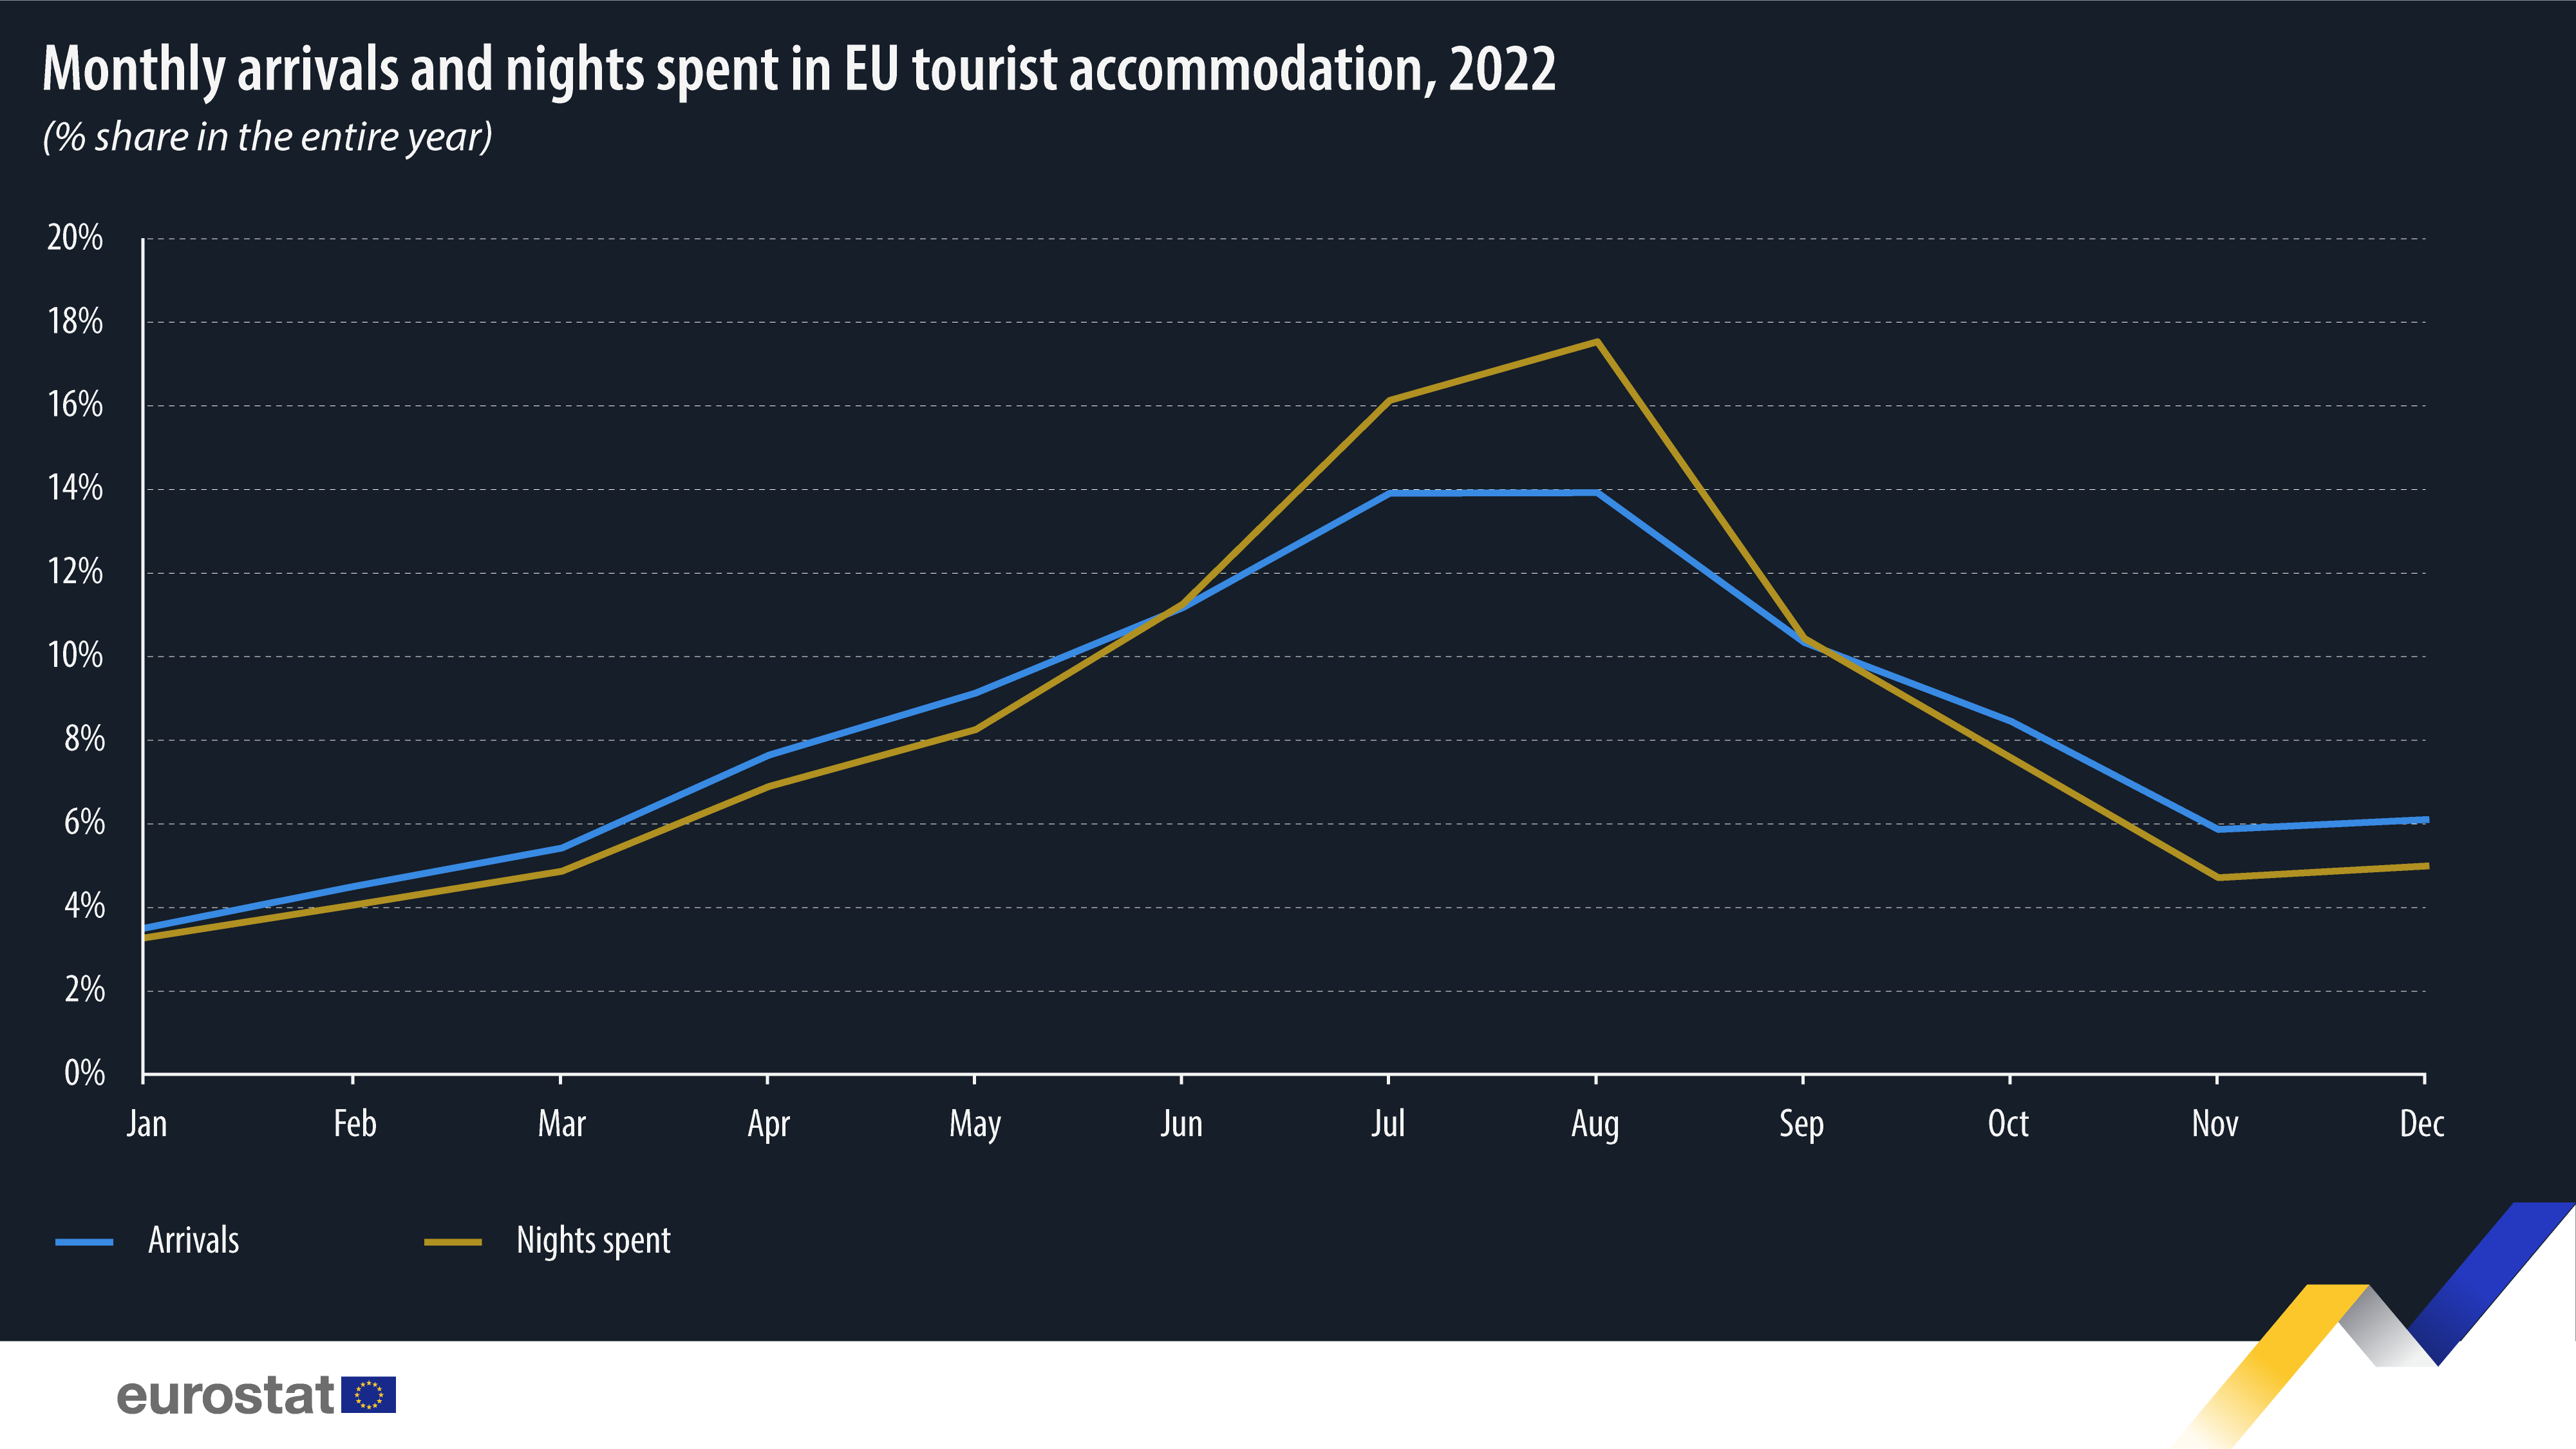 Line graph: Monthly arrivals and nights spent in EU tourist accommodation, share in the entire year, 2022